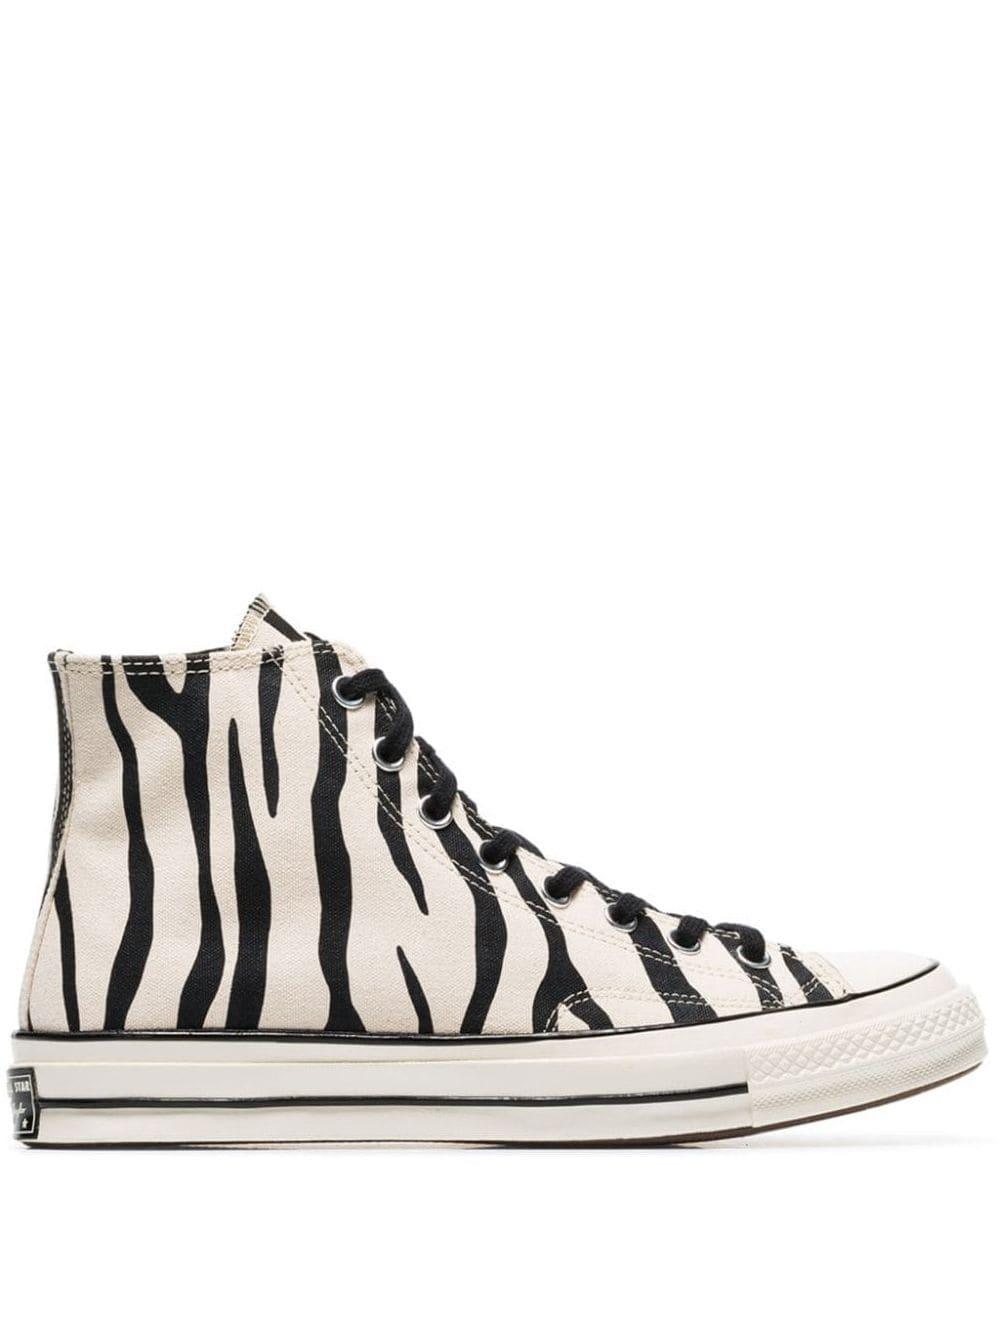 Converse Canvas Black And White Chuck Taylor All Stars 70s Zebra Print  High-top Sneakers for Men - Lyst